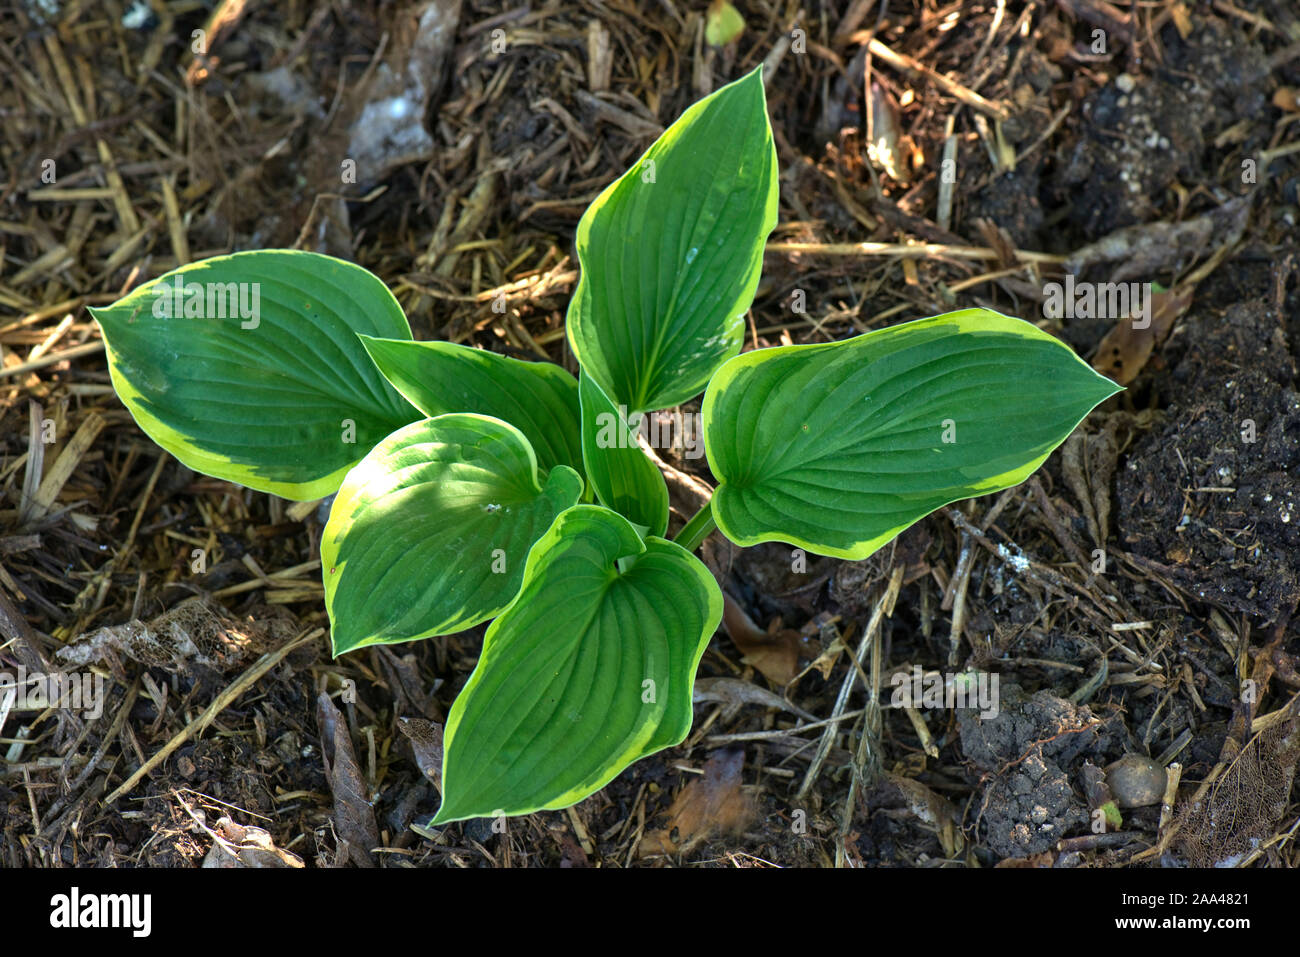 Hosta fortunei 'Aureomarginata', young golden-edged plantain lily plant with strongly veined leaves and a yellow gold marginal border, May Stock Photo